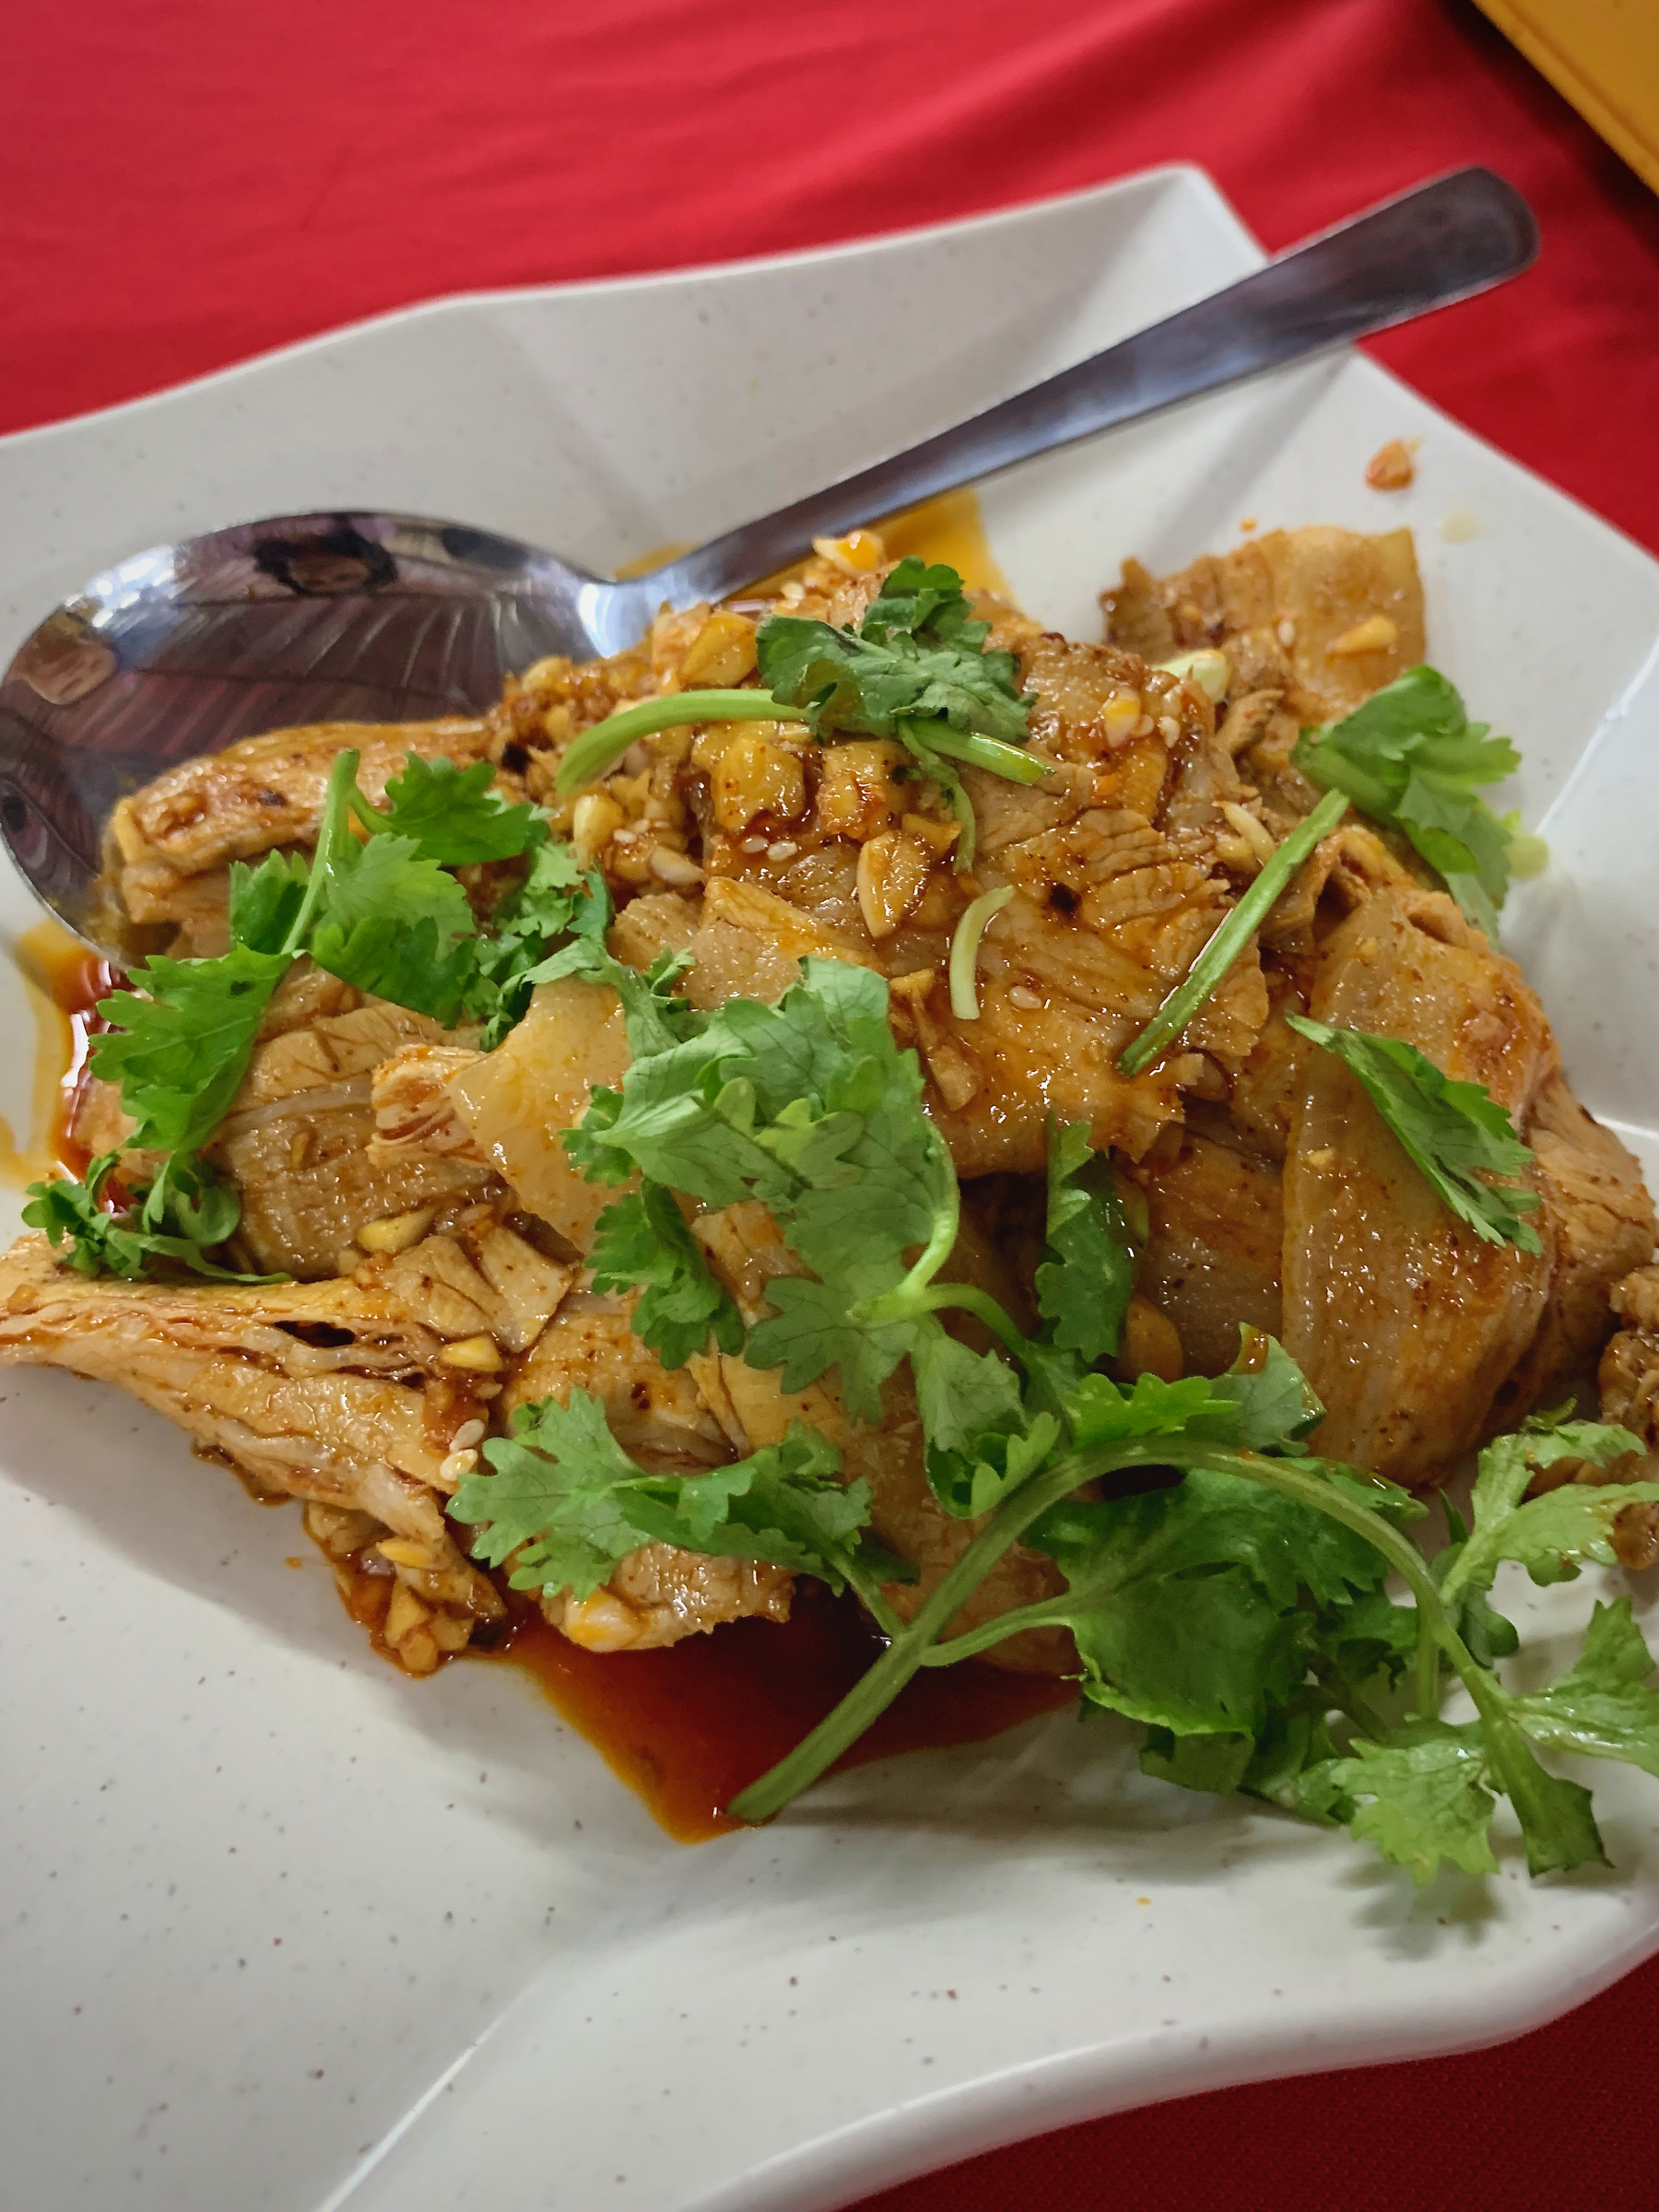 A Pork dish cooked in Chinese Sichuan Style